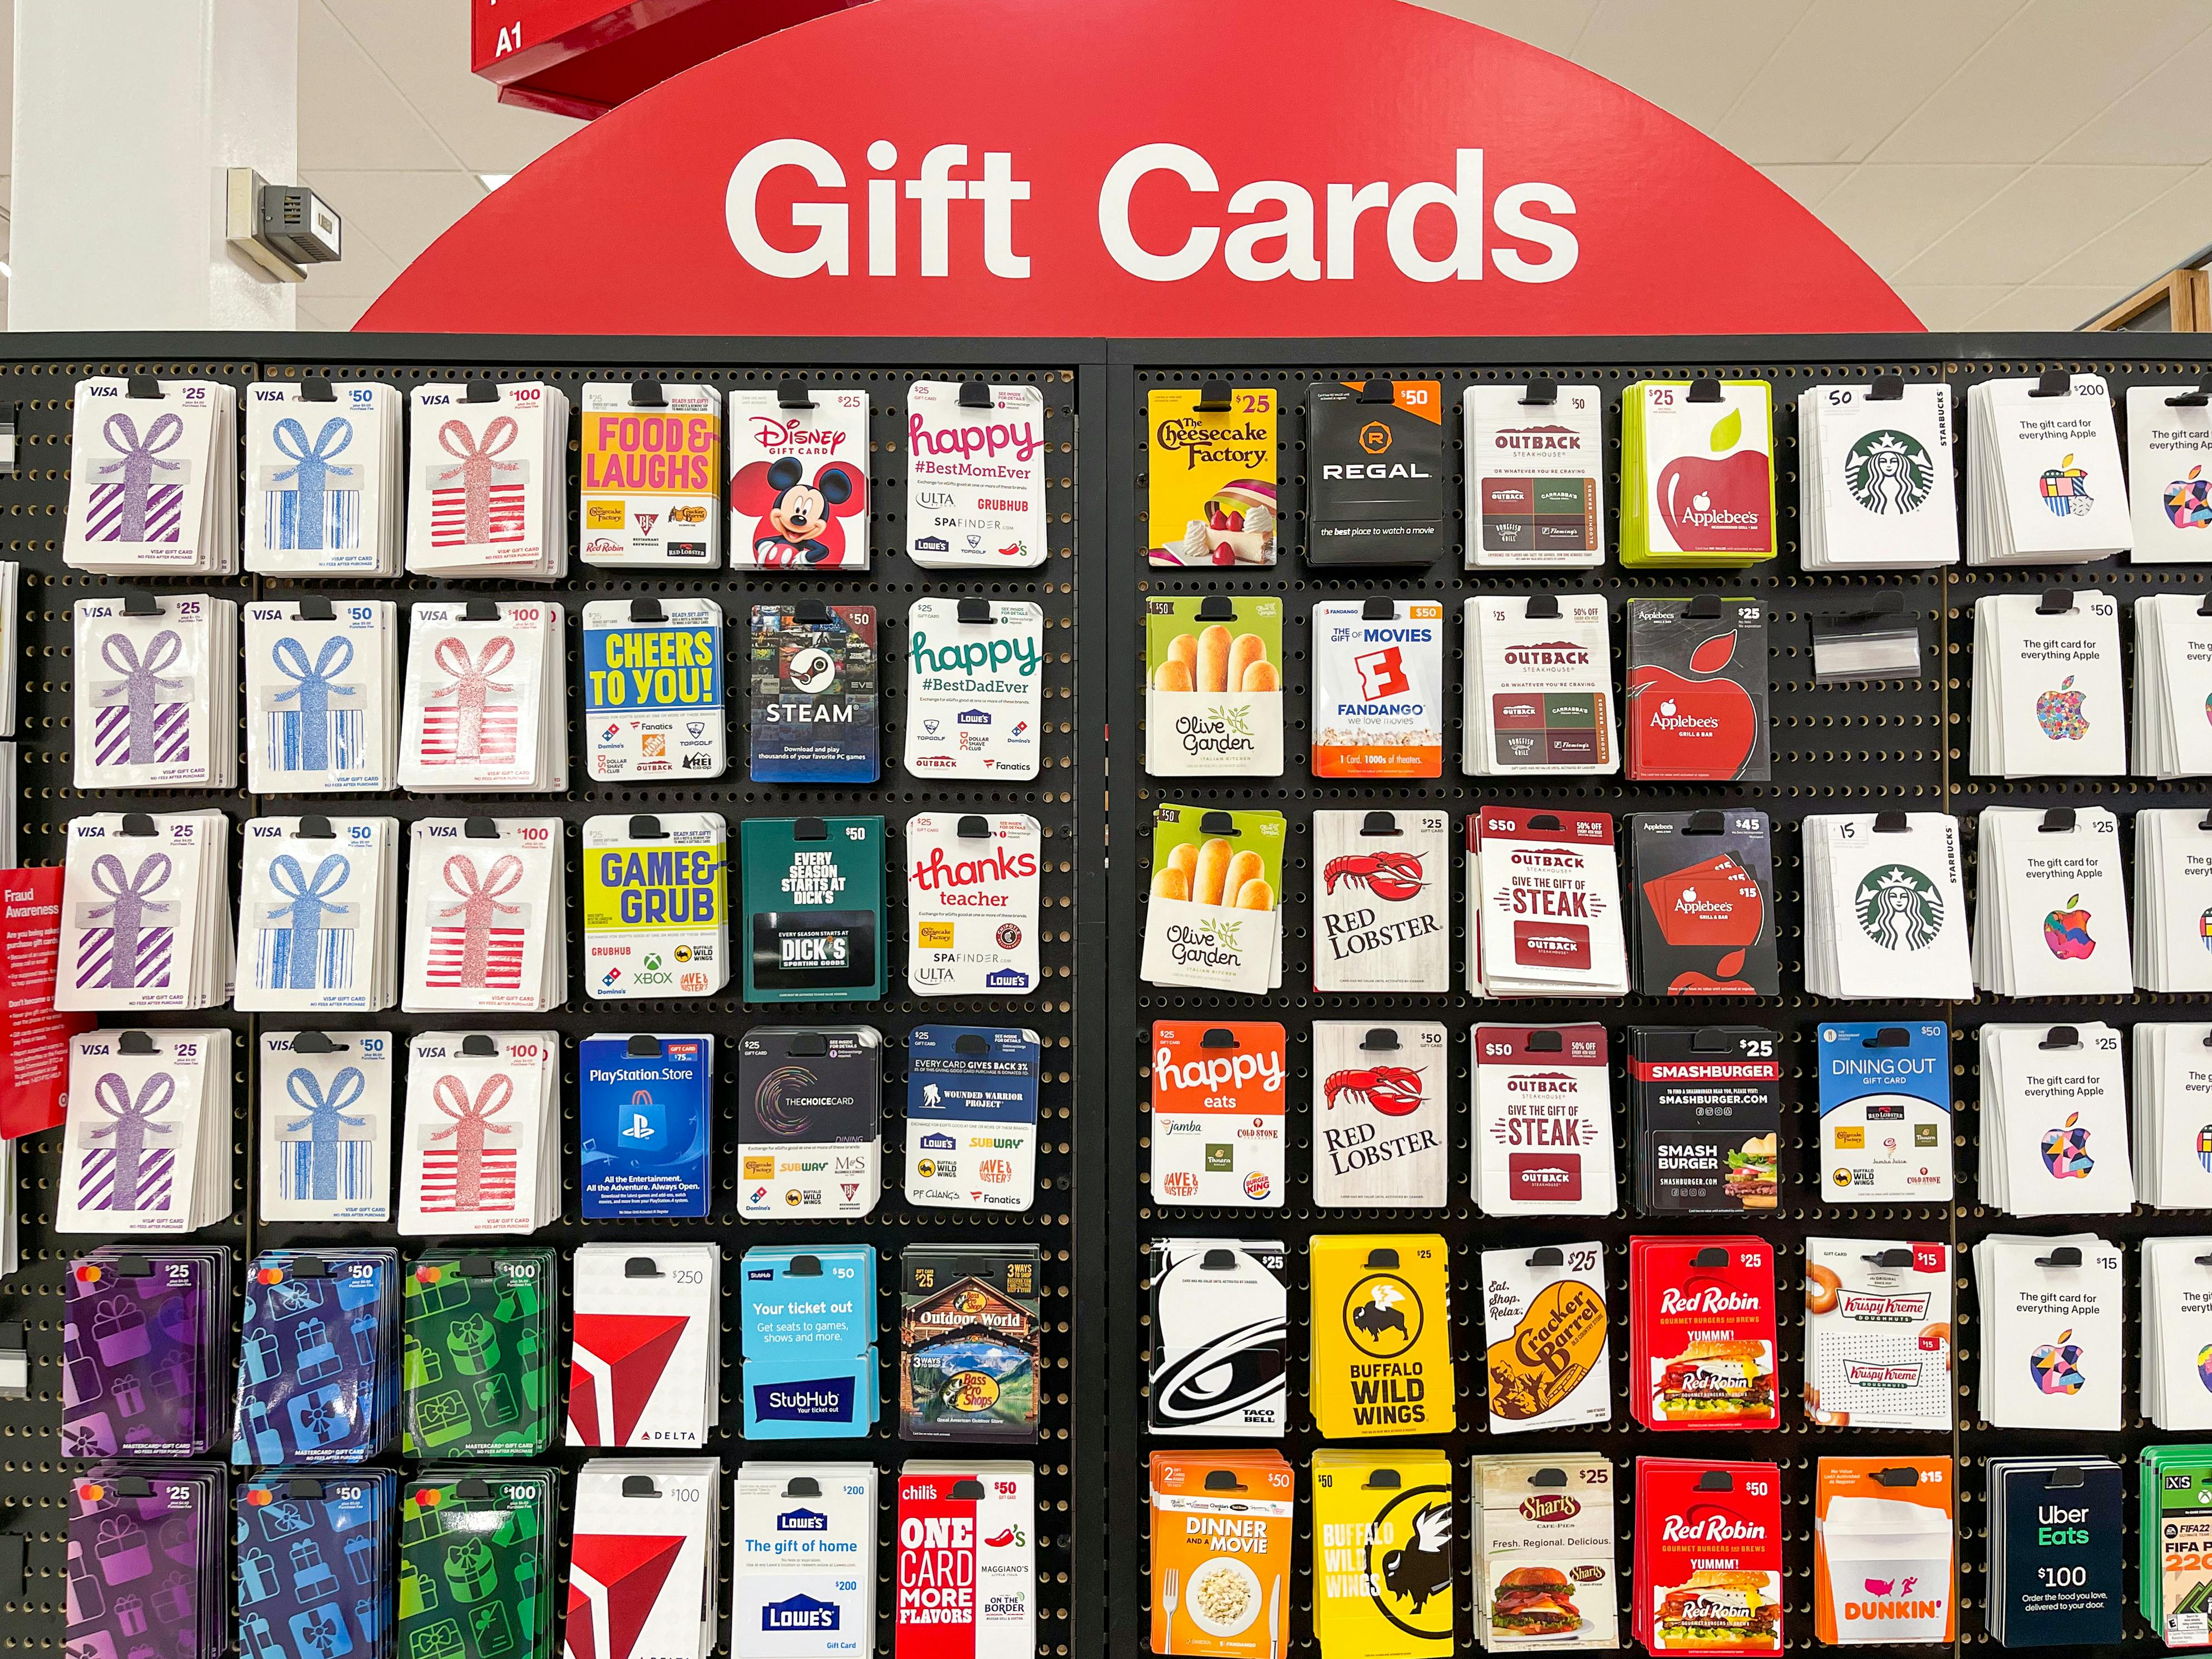 Where to Buy Discounted Amazon Gift Cards?